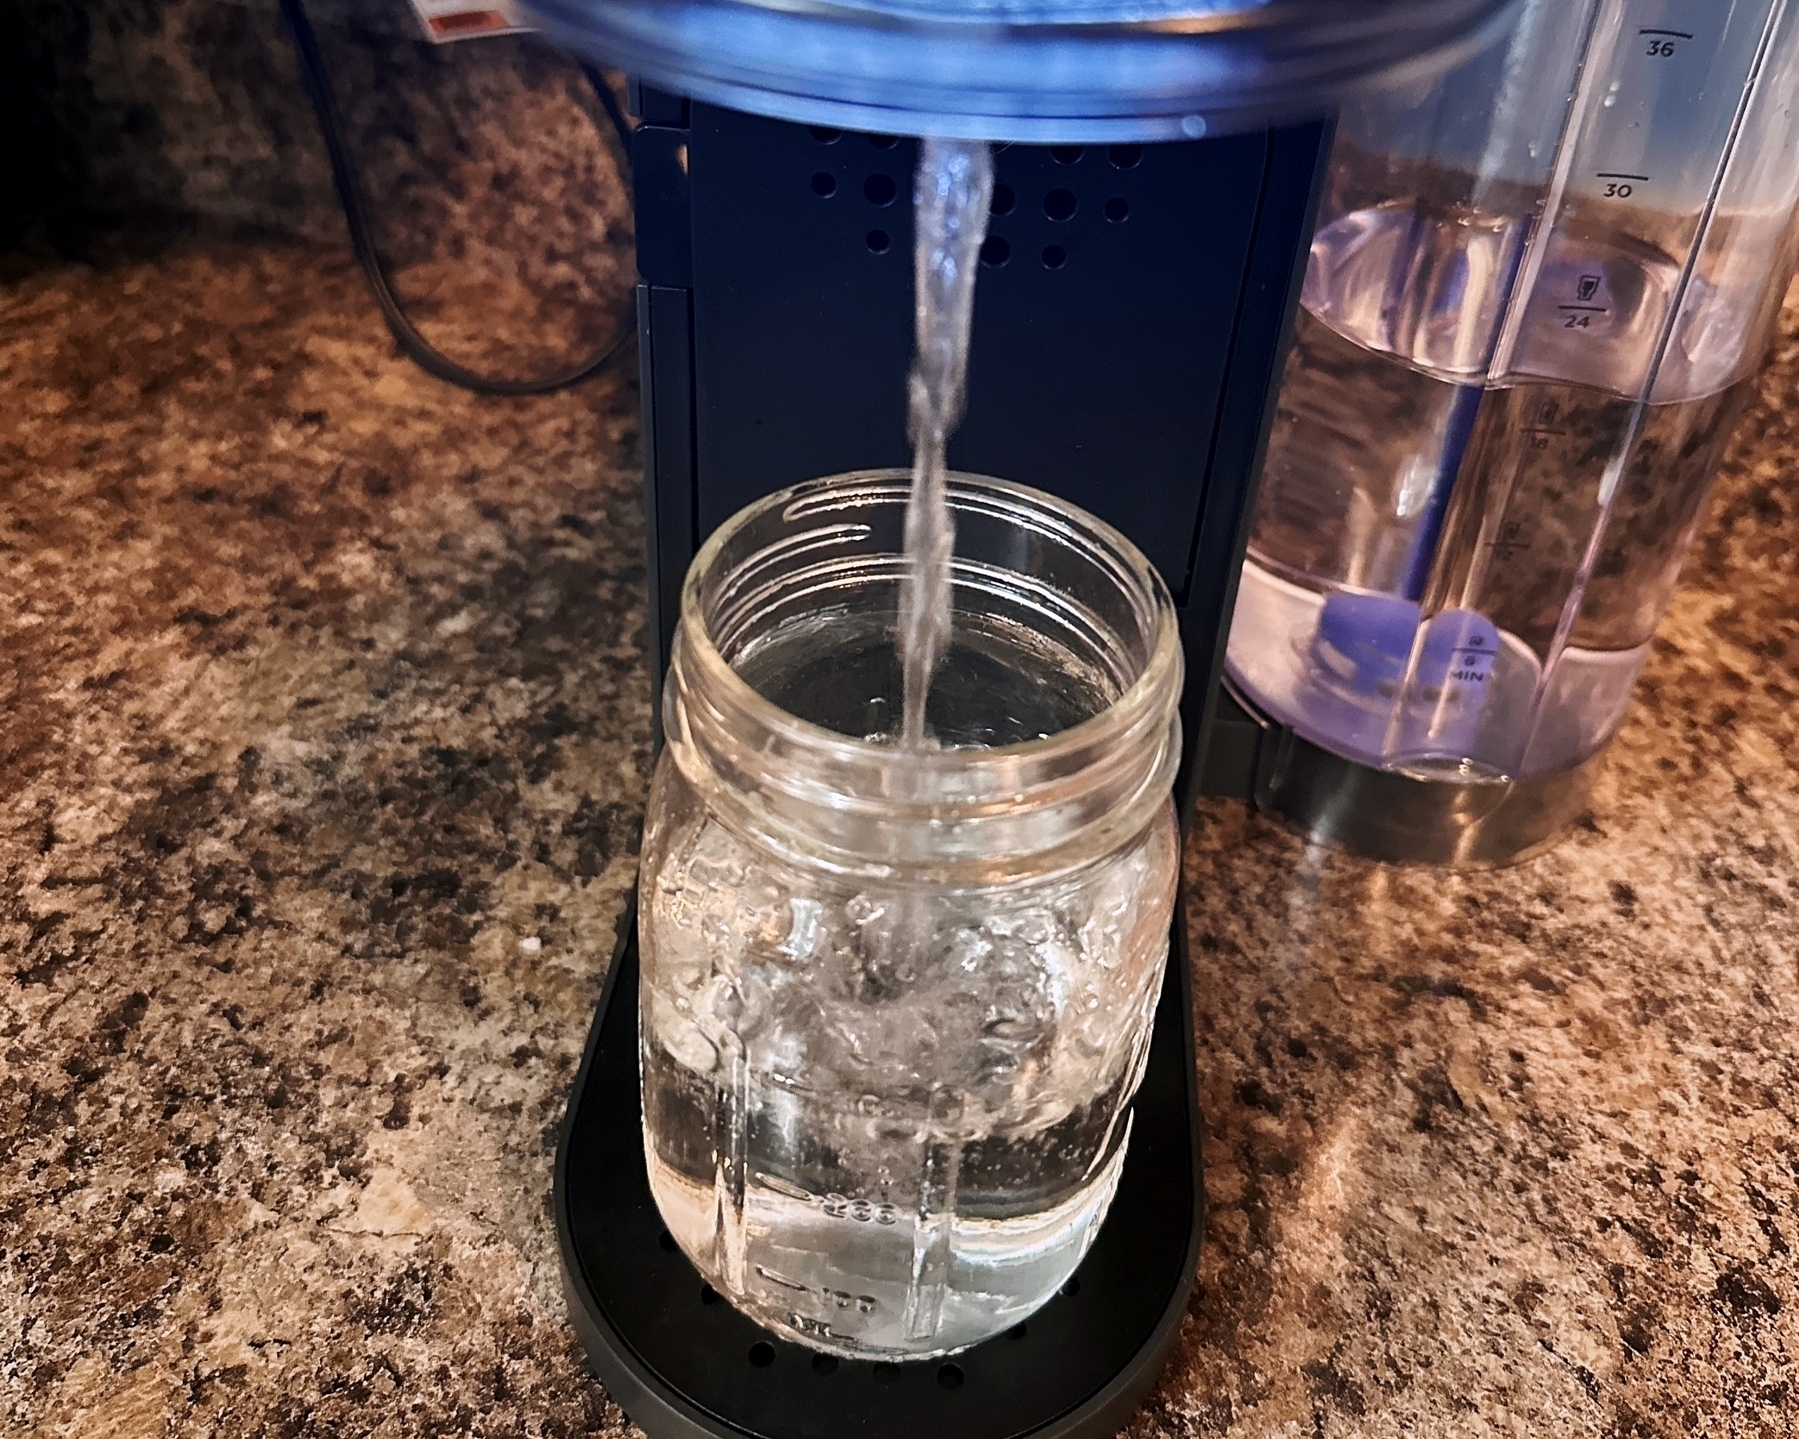 A water filter pitcher is dispensing water into a glass jar on a kitchen countertop.